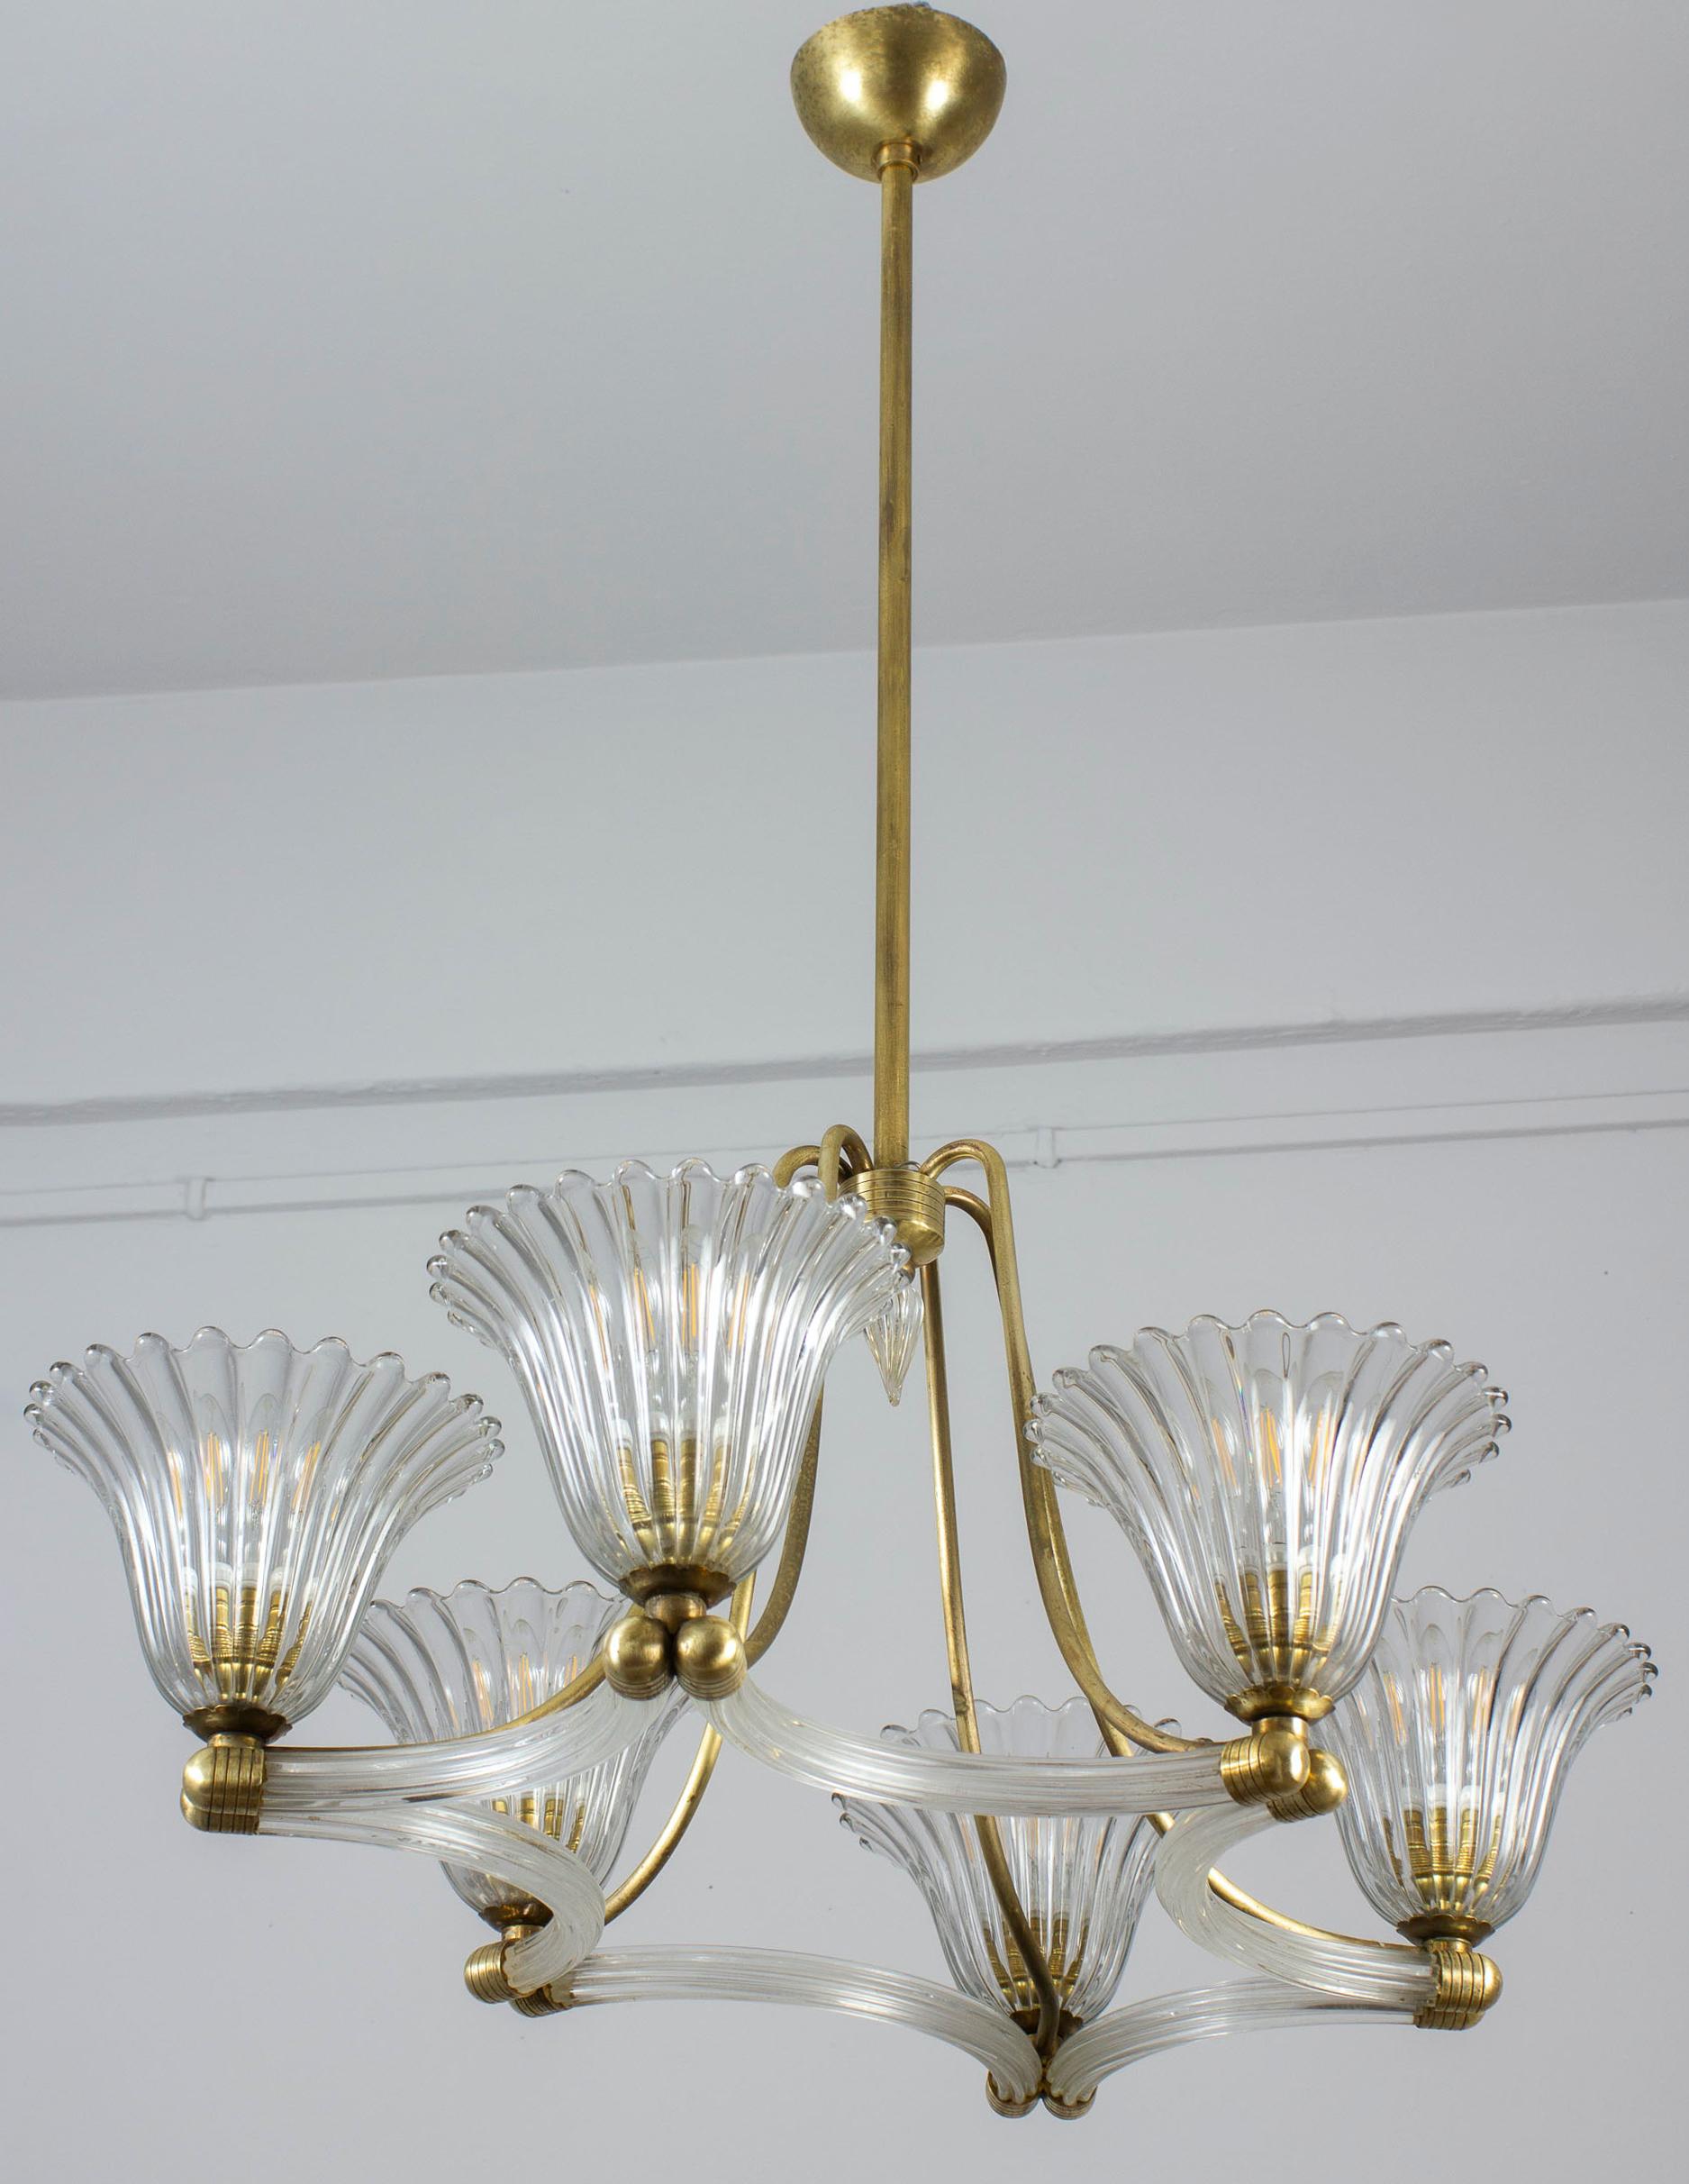  Art Deco Brass Mounted Murano Glass Chandelier by Ercole Barovier 1940 For Sale 6